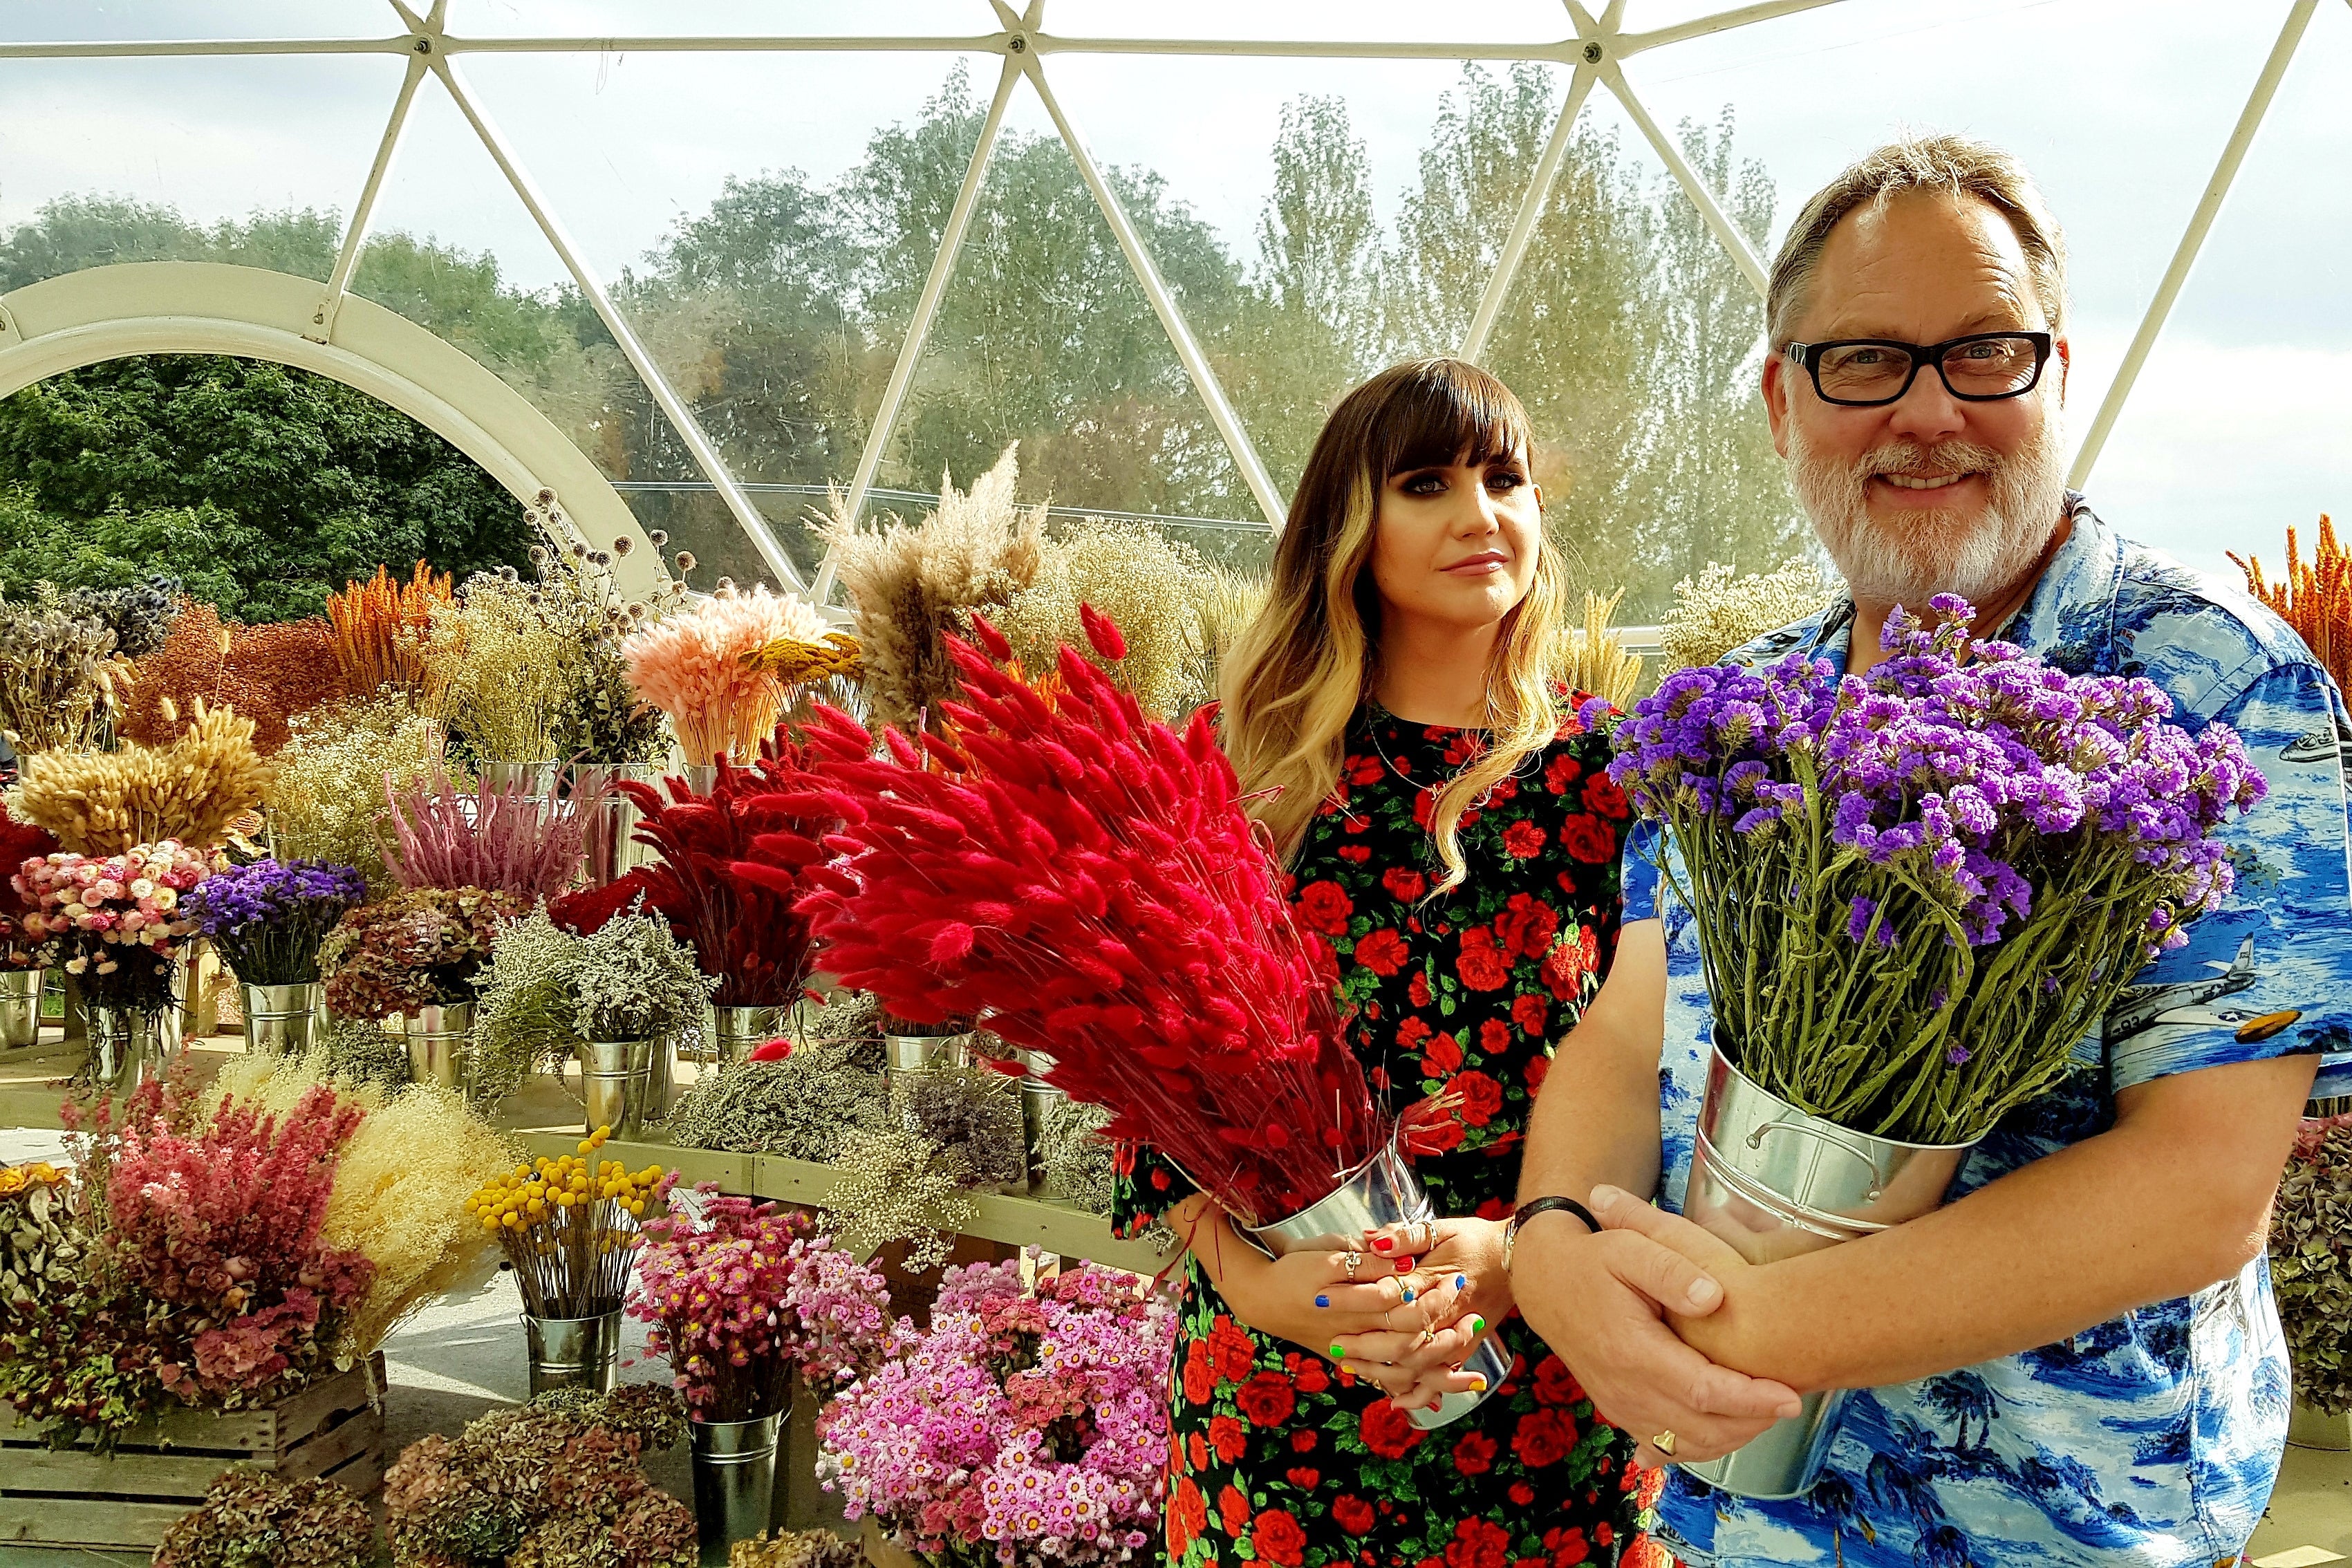 The hosts of The Big Flower Fight, surrounded by flowers.